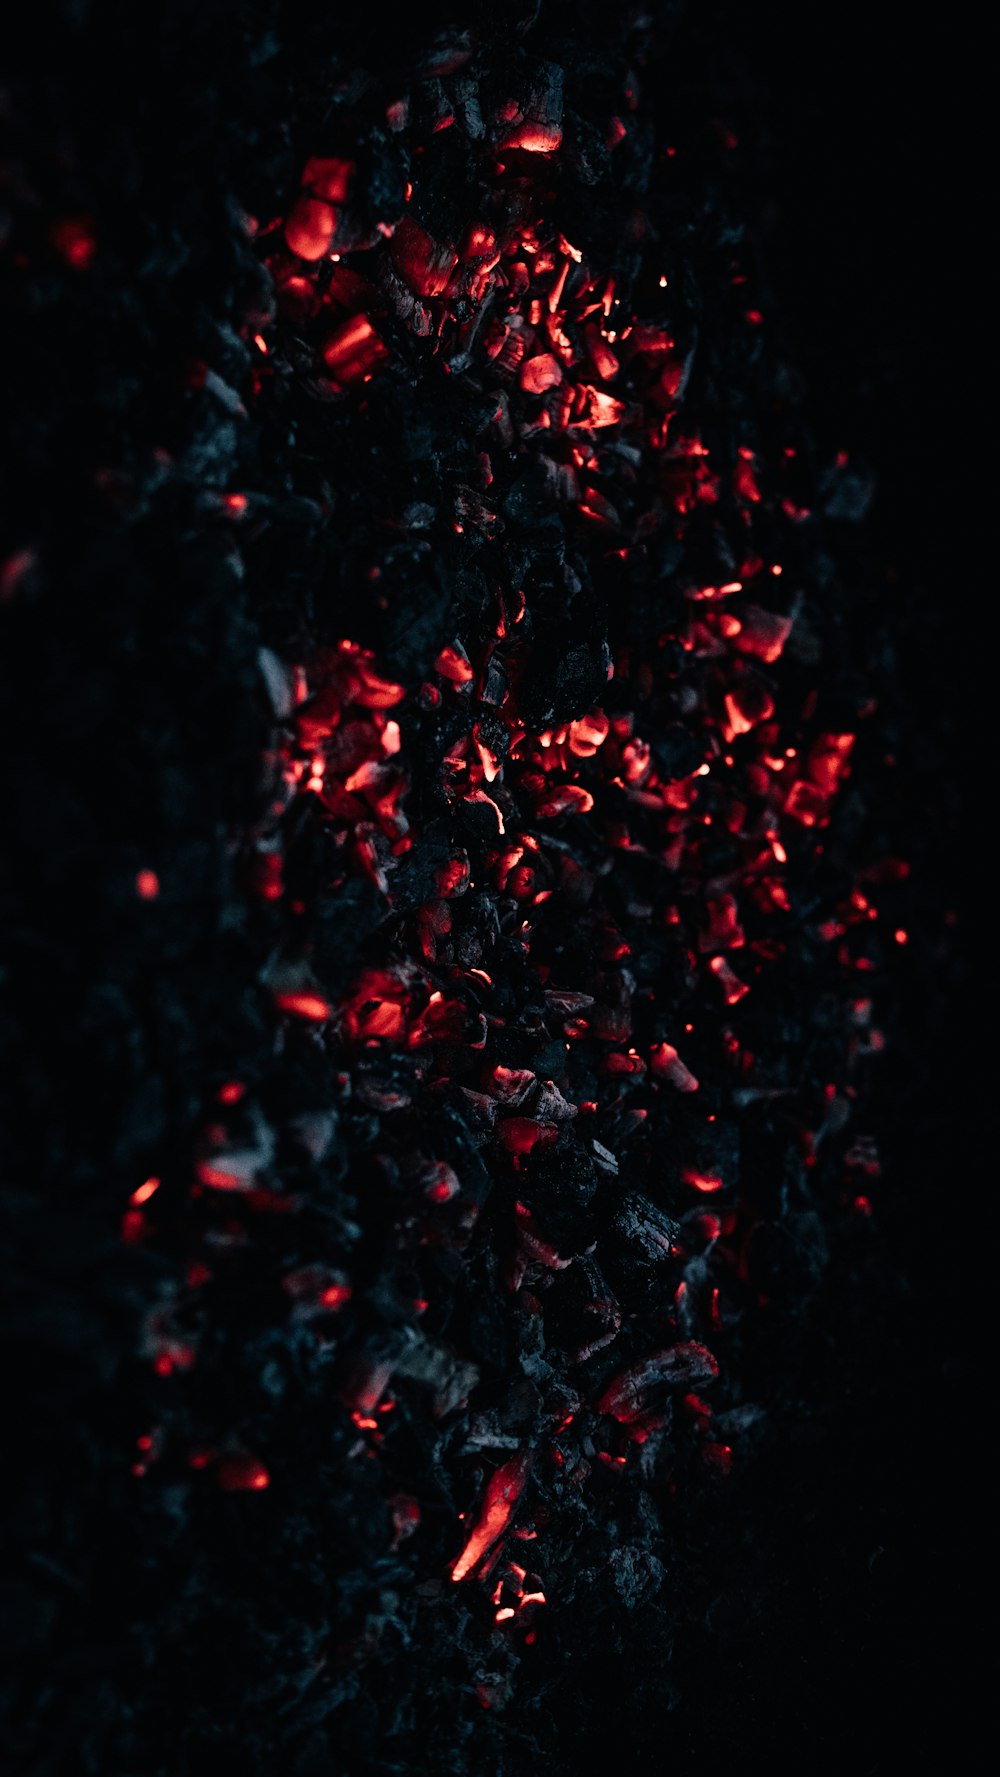 a close up of a black and red object